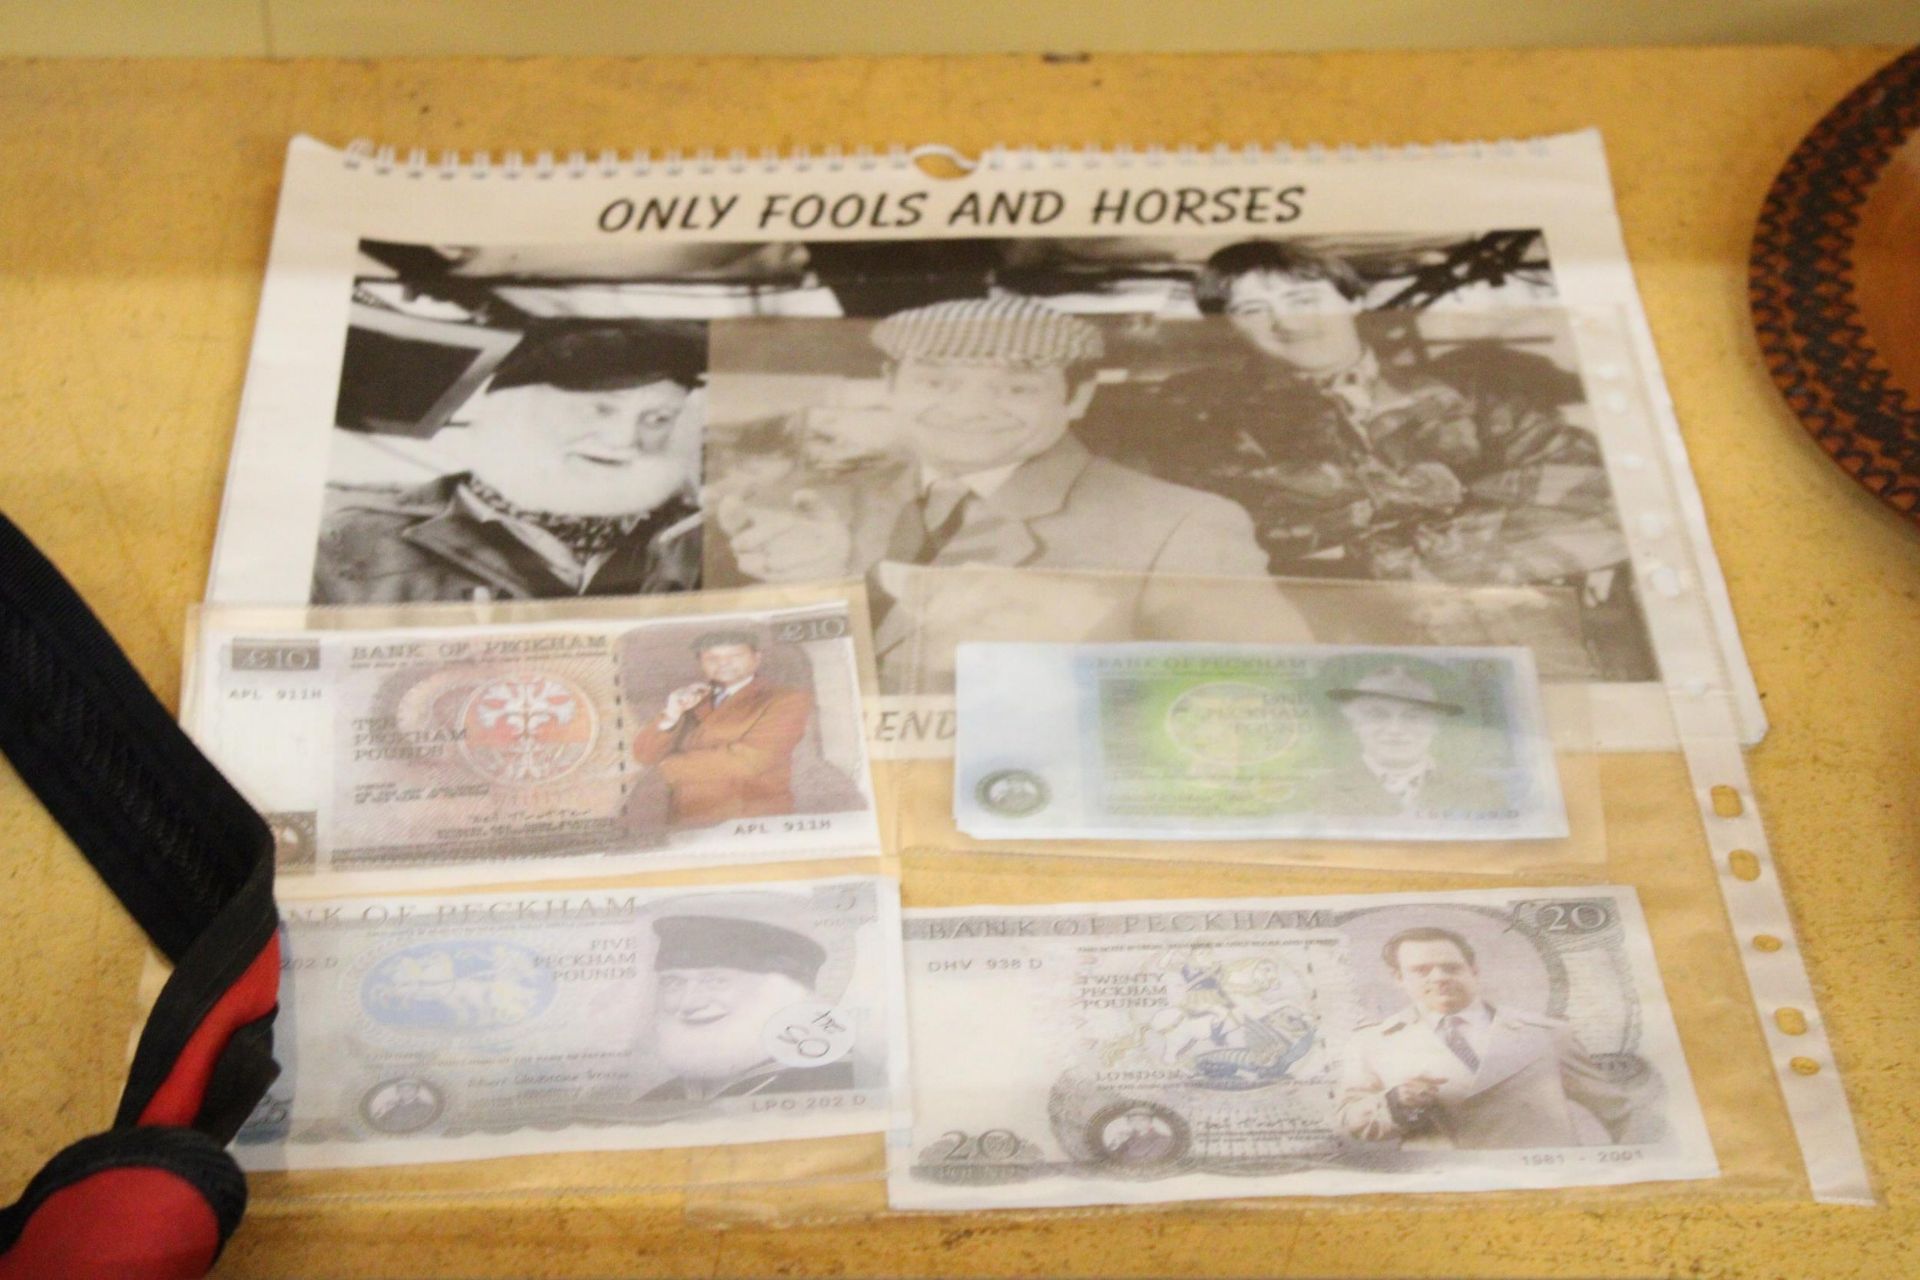 TEN £1 NOTES, ONE £5 NOTE, ONE £10 NOTE AND ONE £20 NOTE FOR THE BANK OF PECKHAM (ONLY FOOLS AND